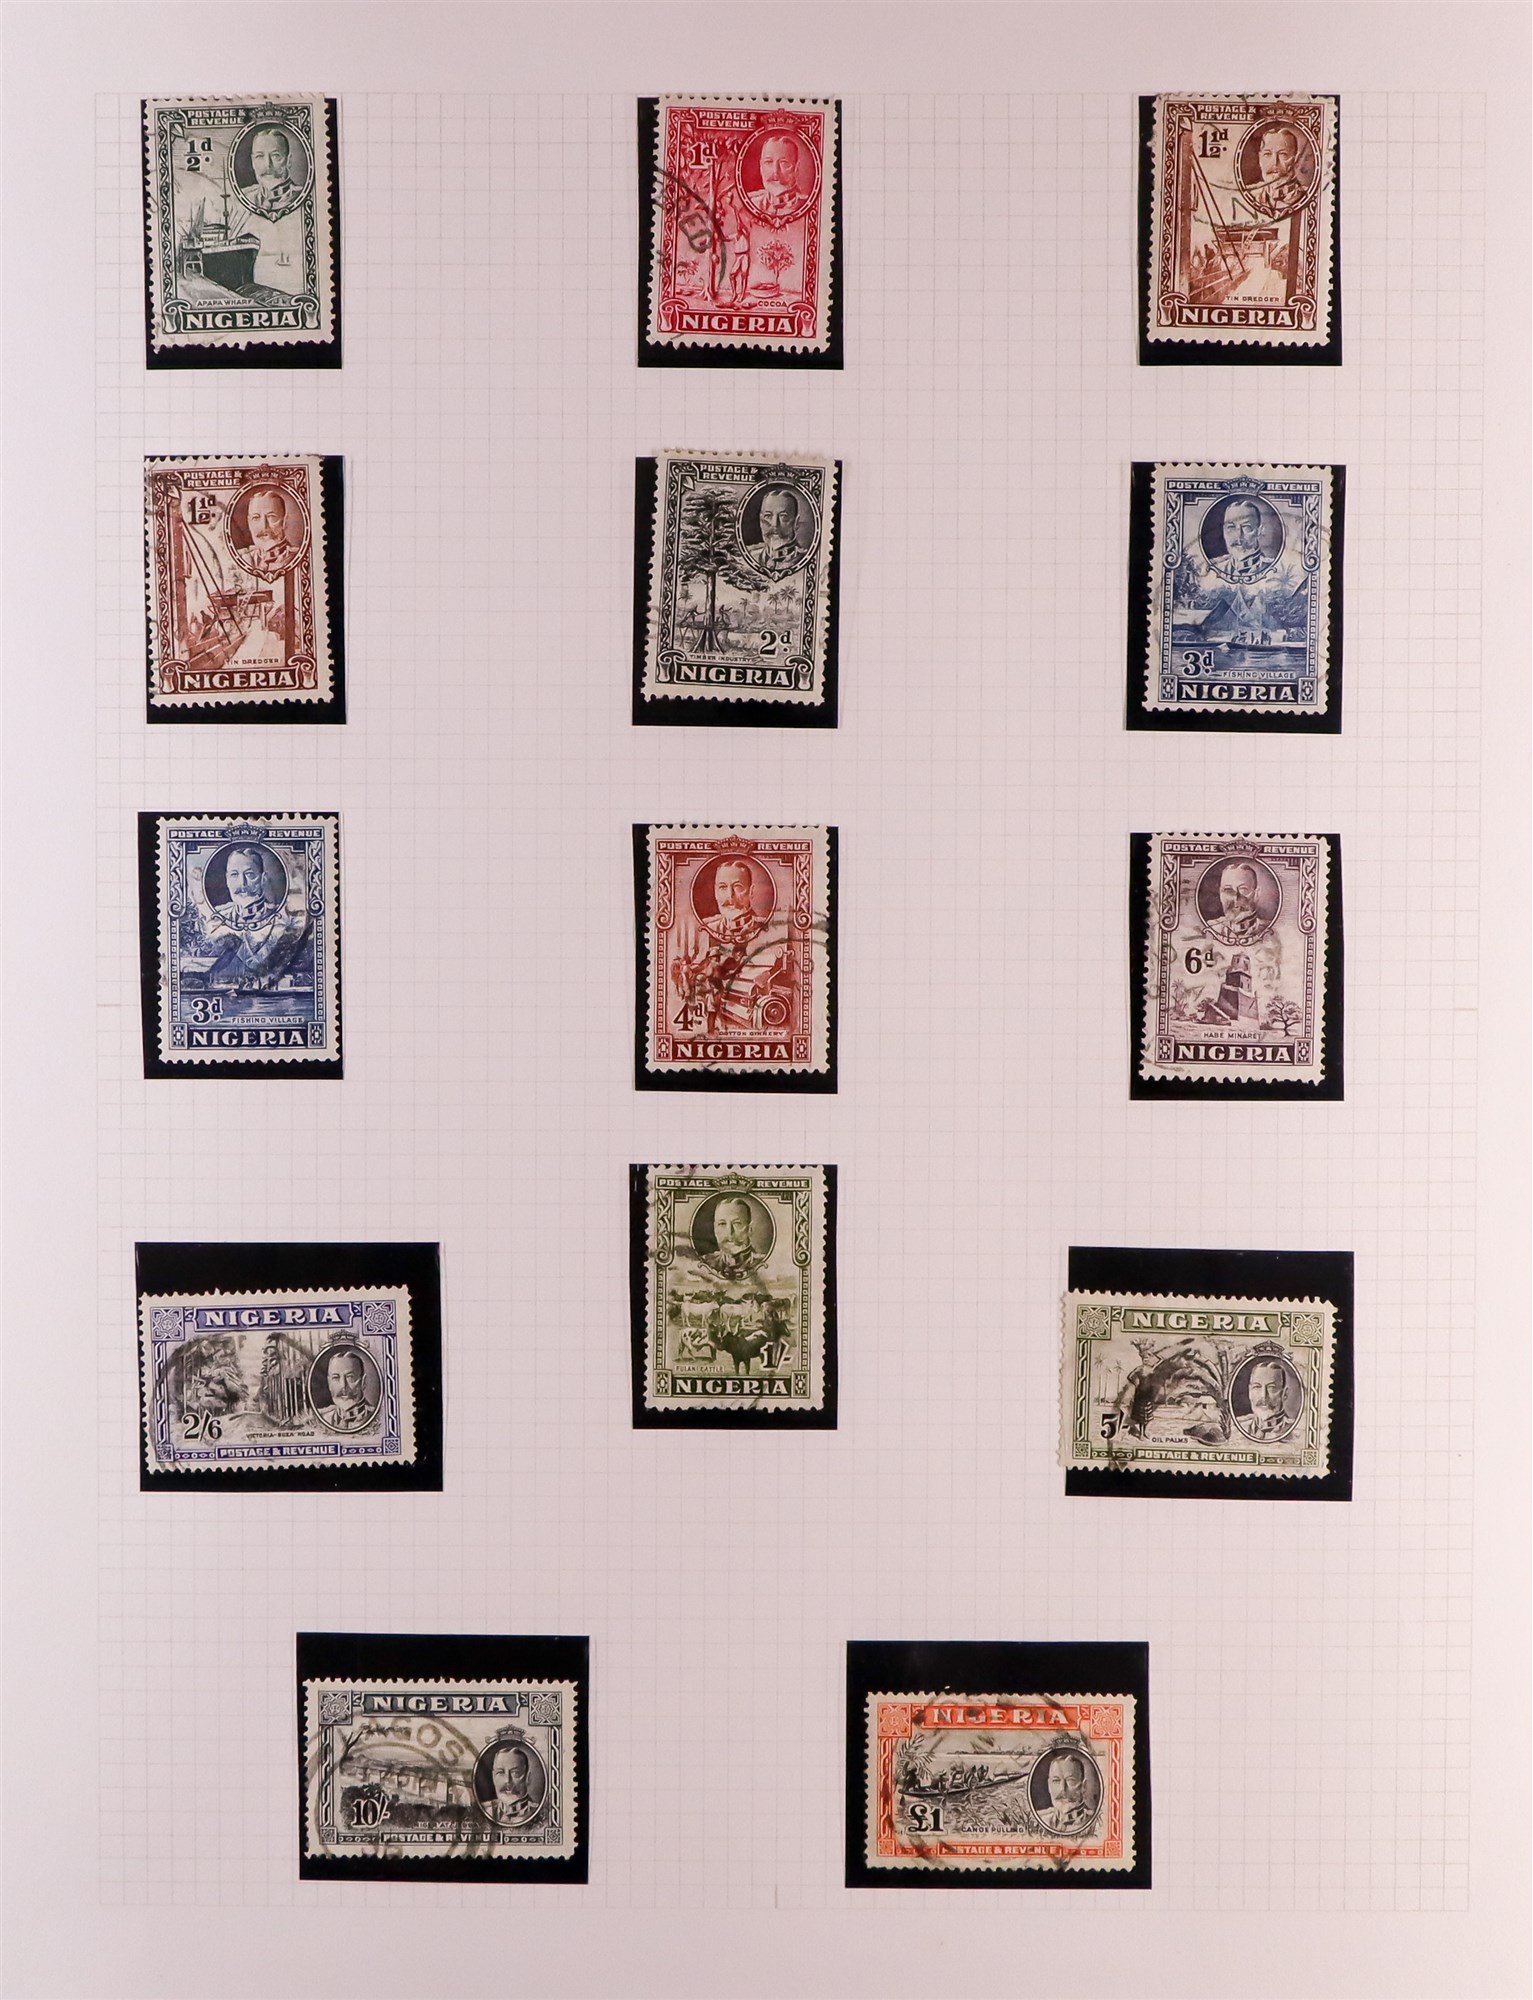 NIGERIA 'THE NIGERIAS' COLLECTION OF QV TO KGV ISSUES almost entirely mint (in terms of value) - Image 18 of 18